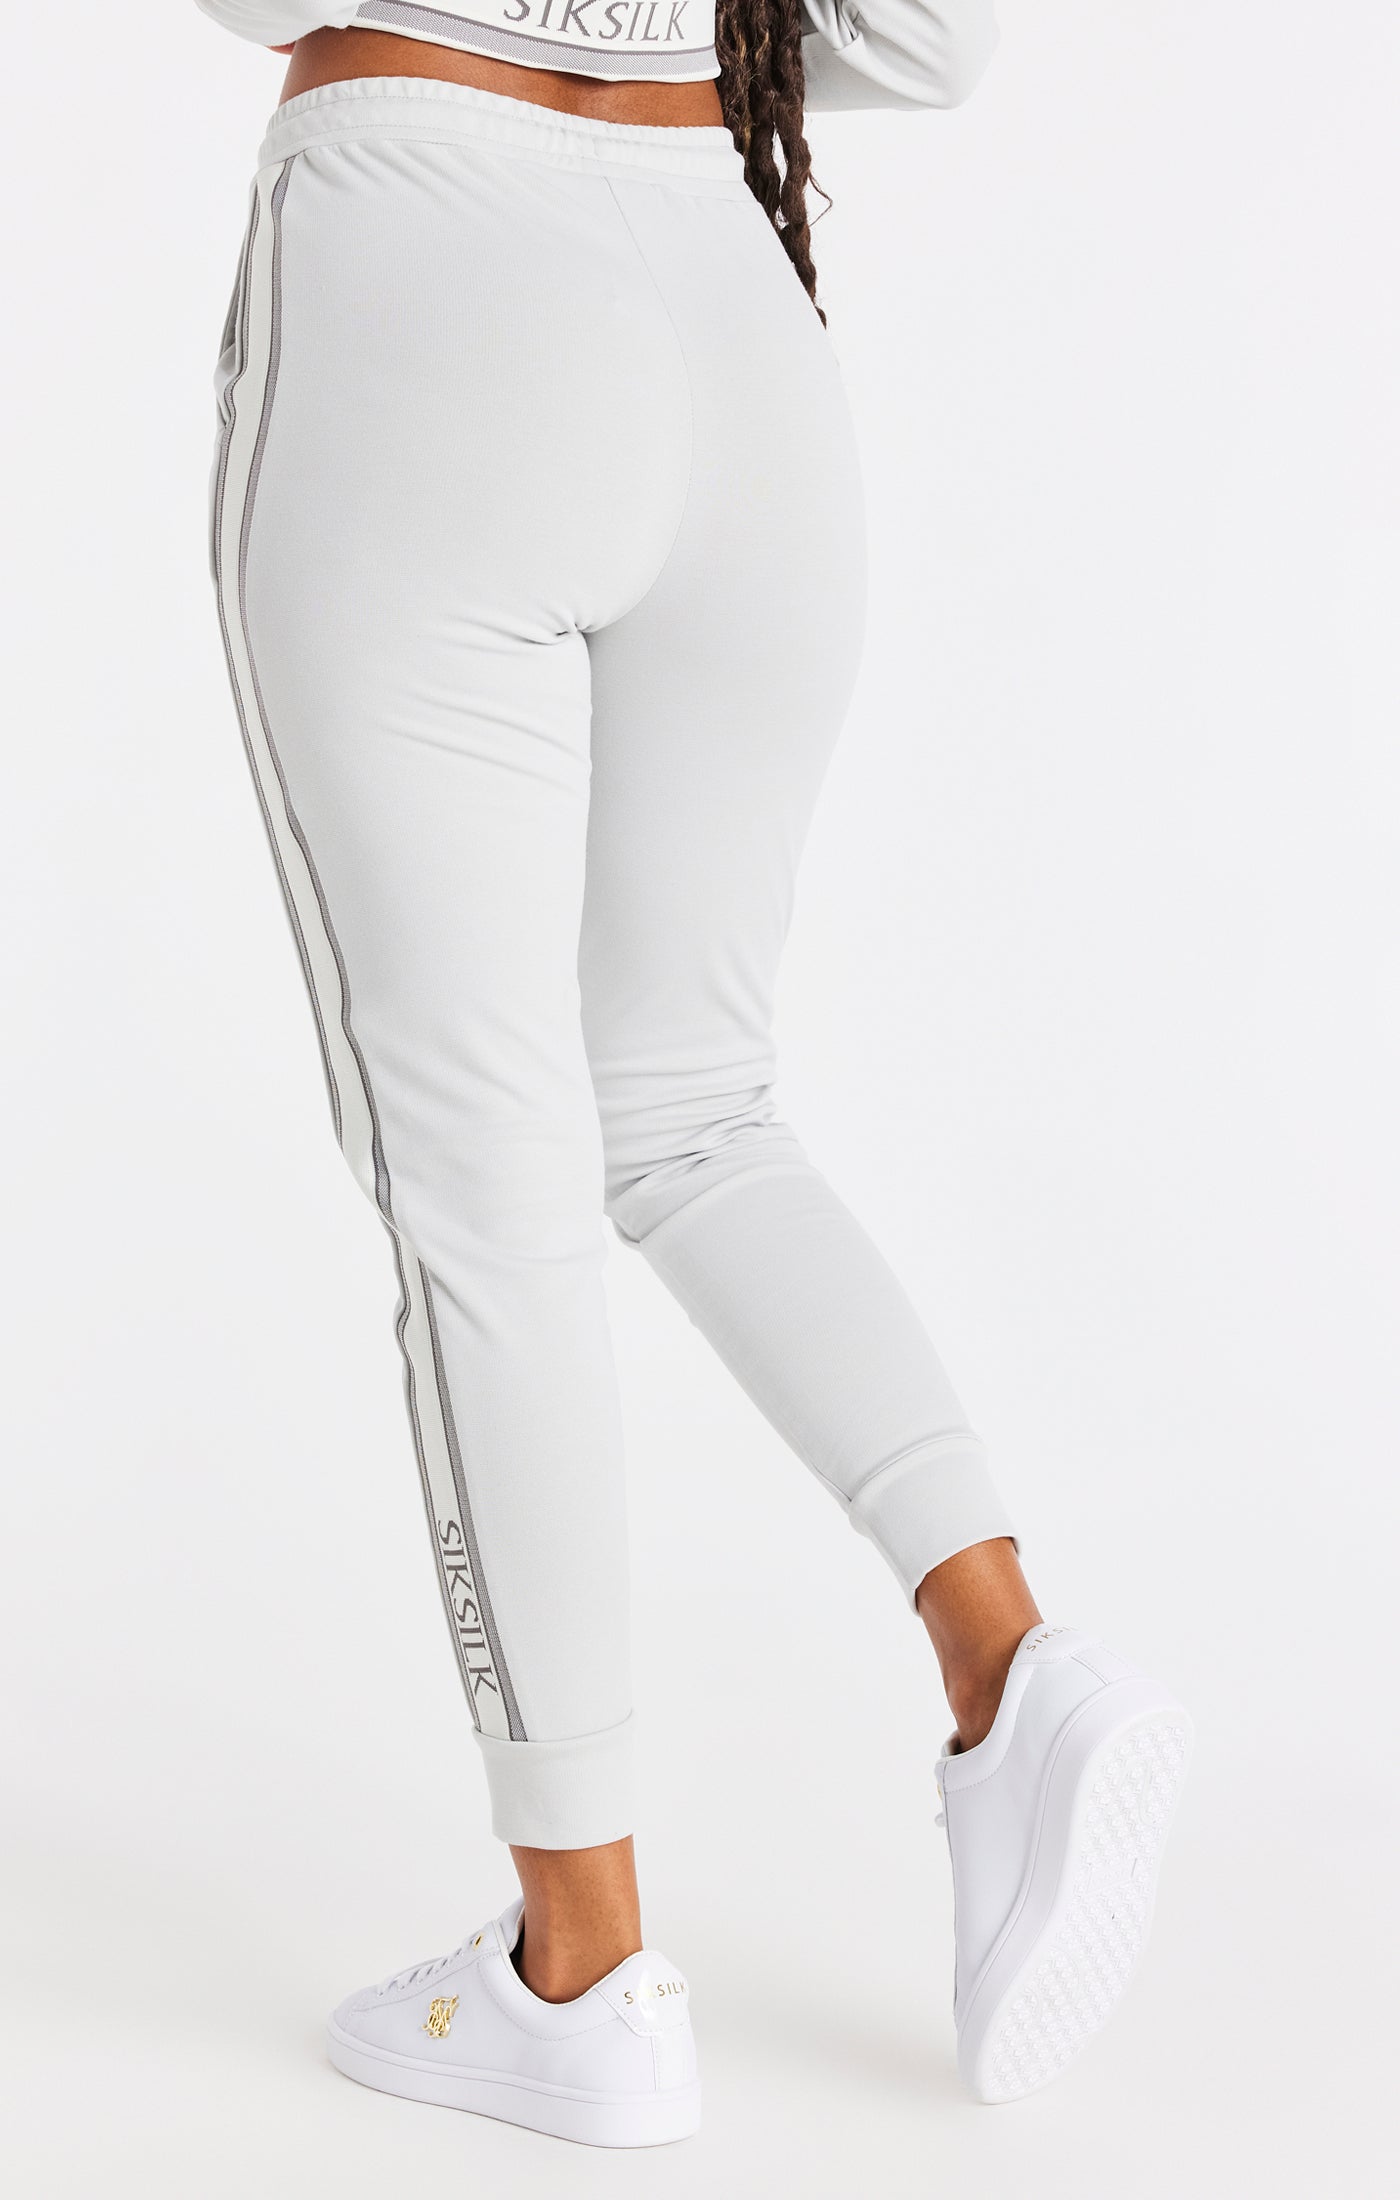 Load image into Gallery viewer, SikSilk Elevate Pants - Light Grey (2)